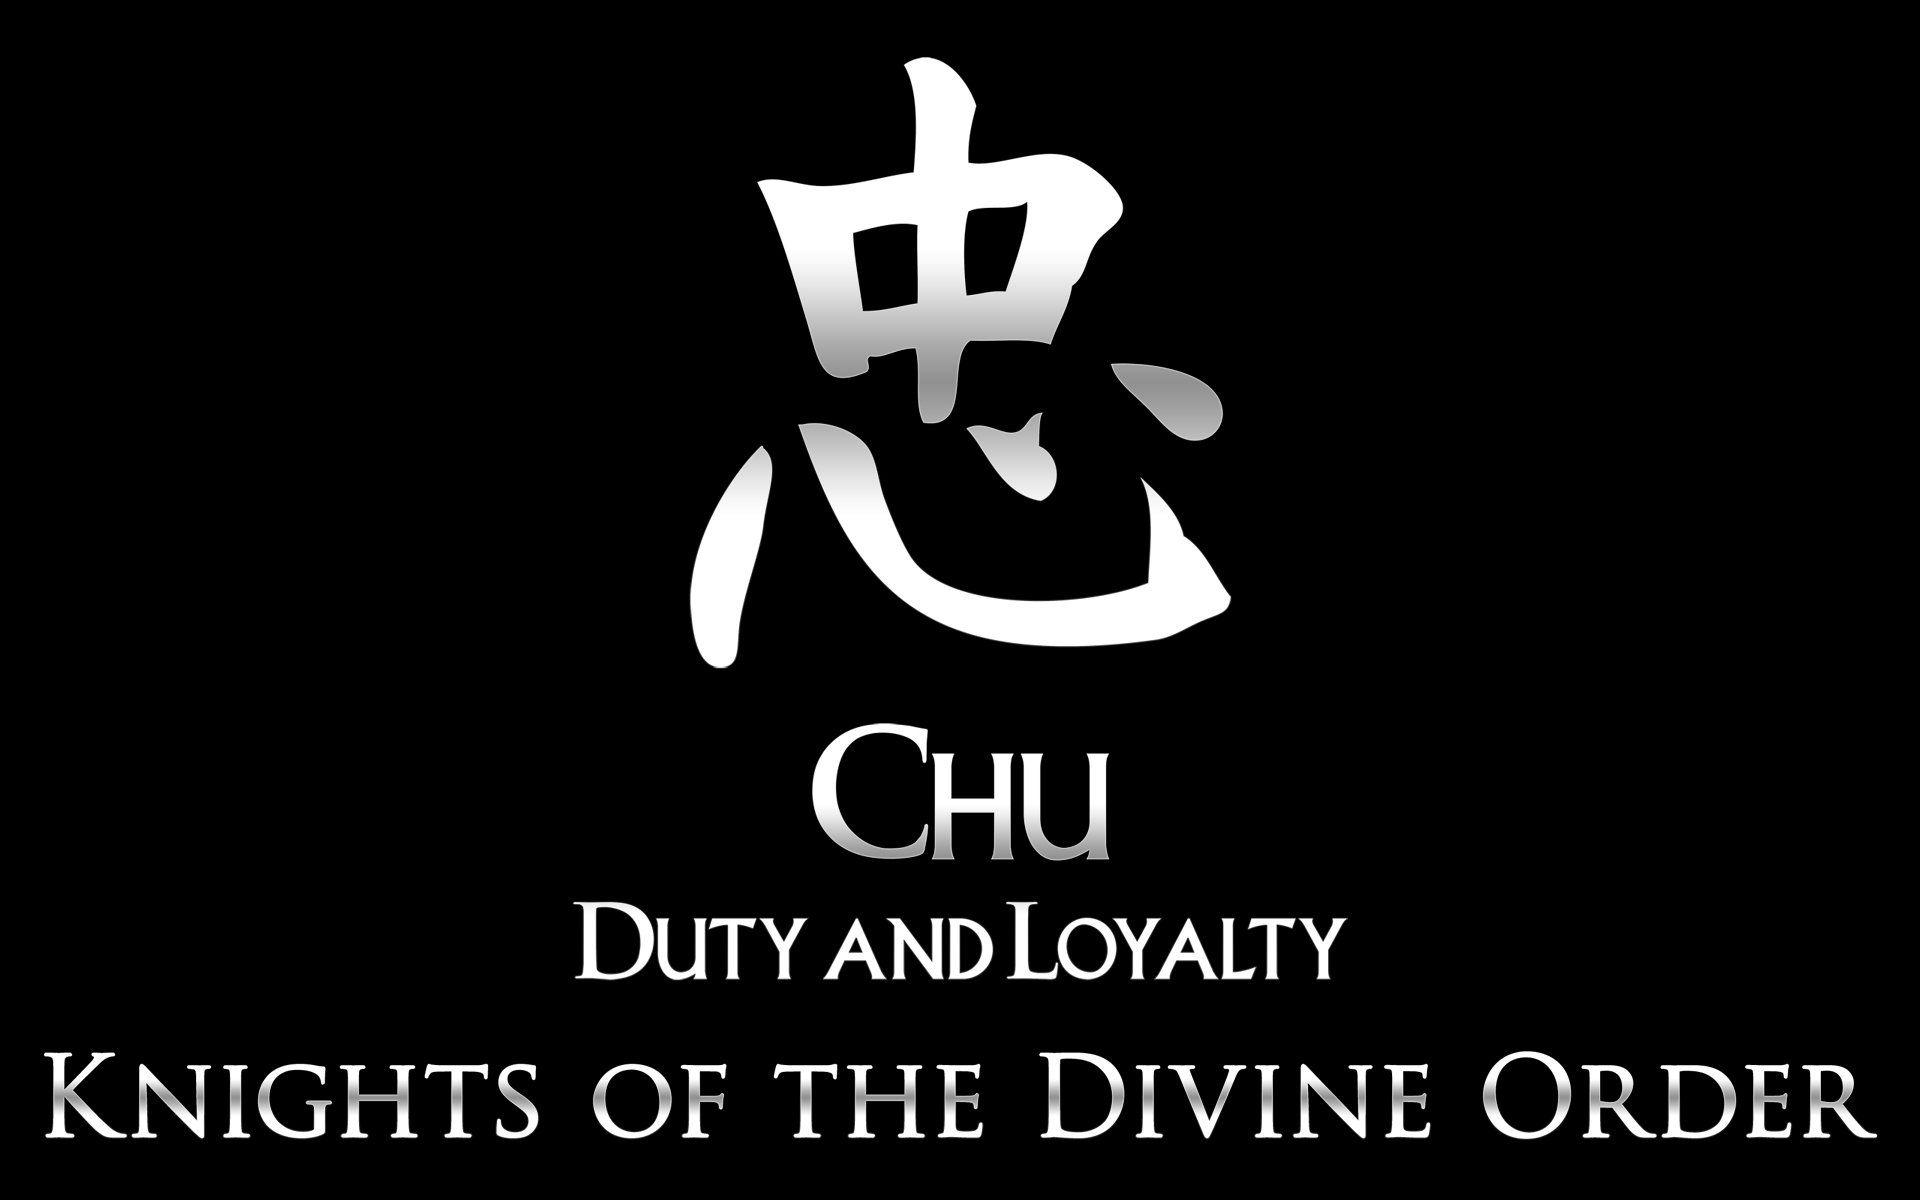 Duty and Loyalty: You serve your purpose and do what you must do HD